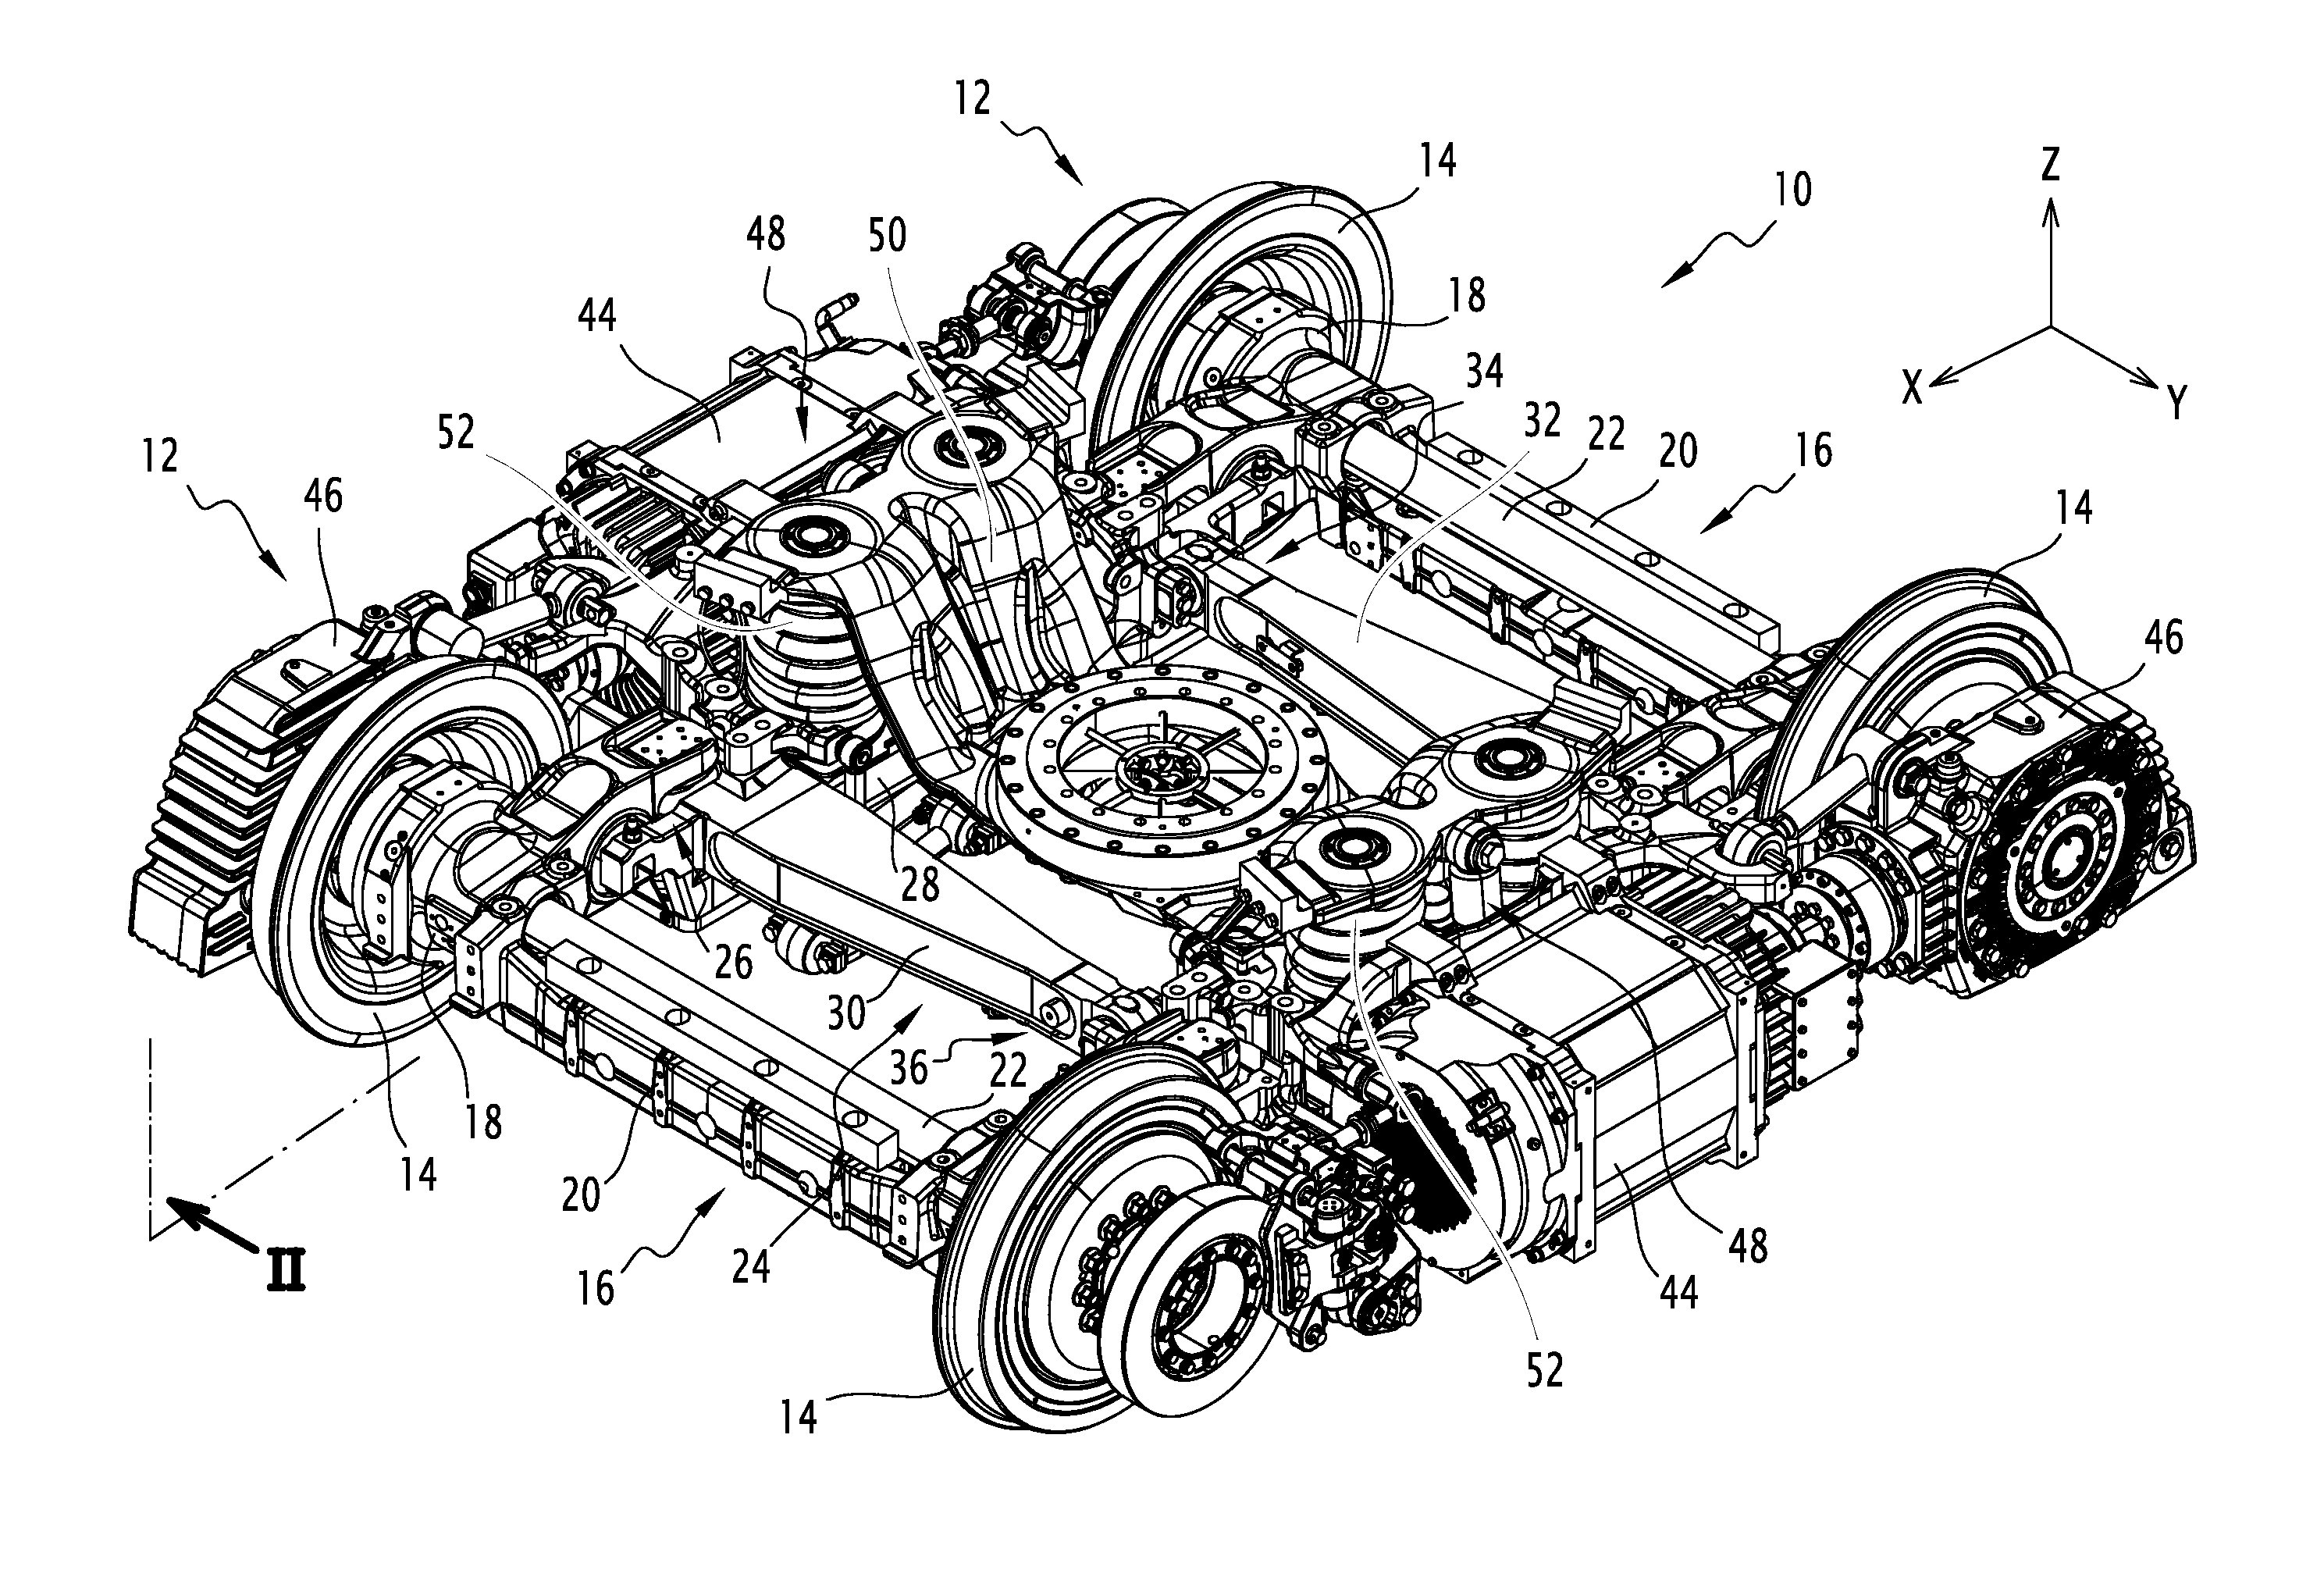 Bogie for Railway Vehicle with a Suspension System